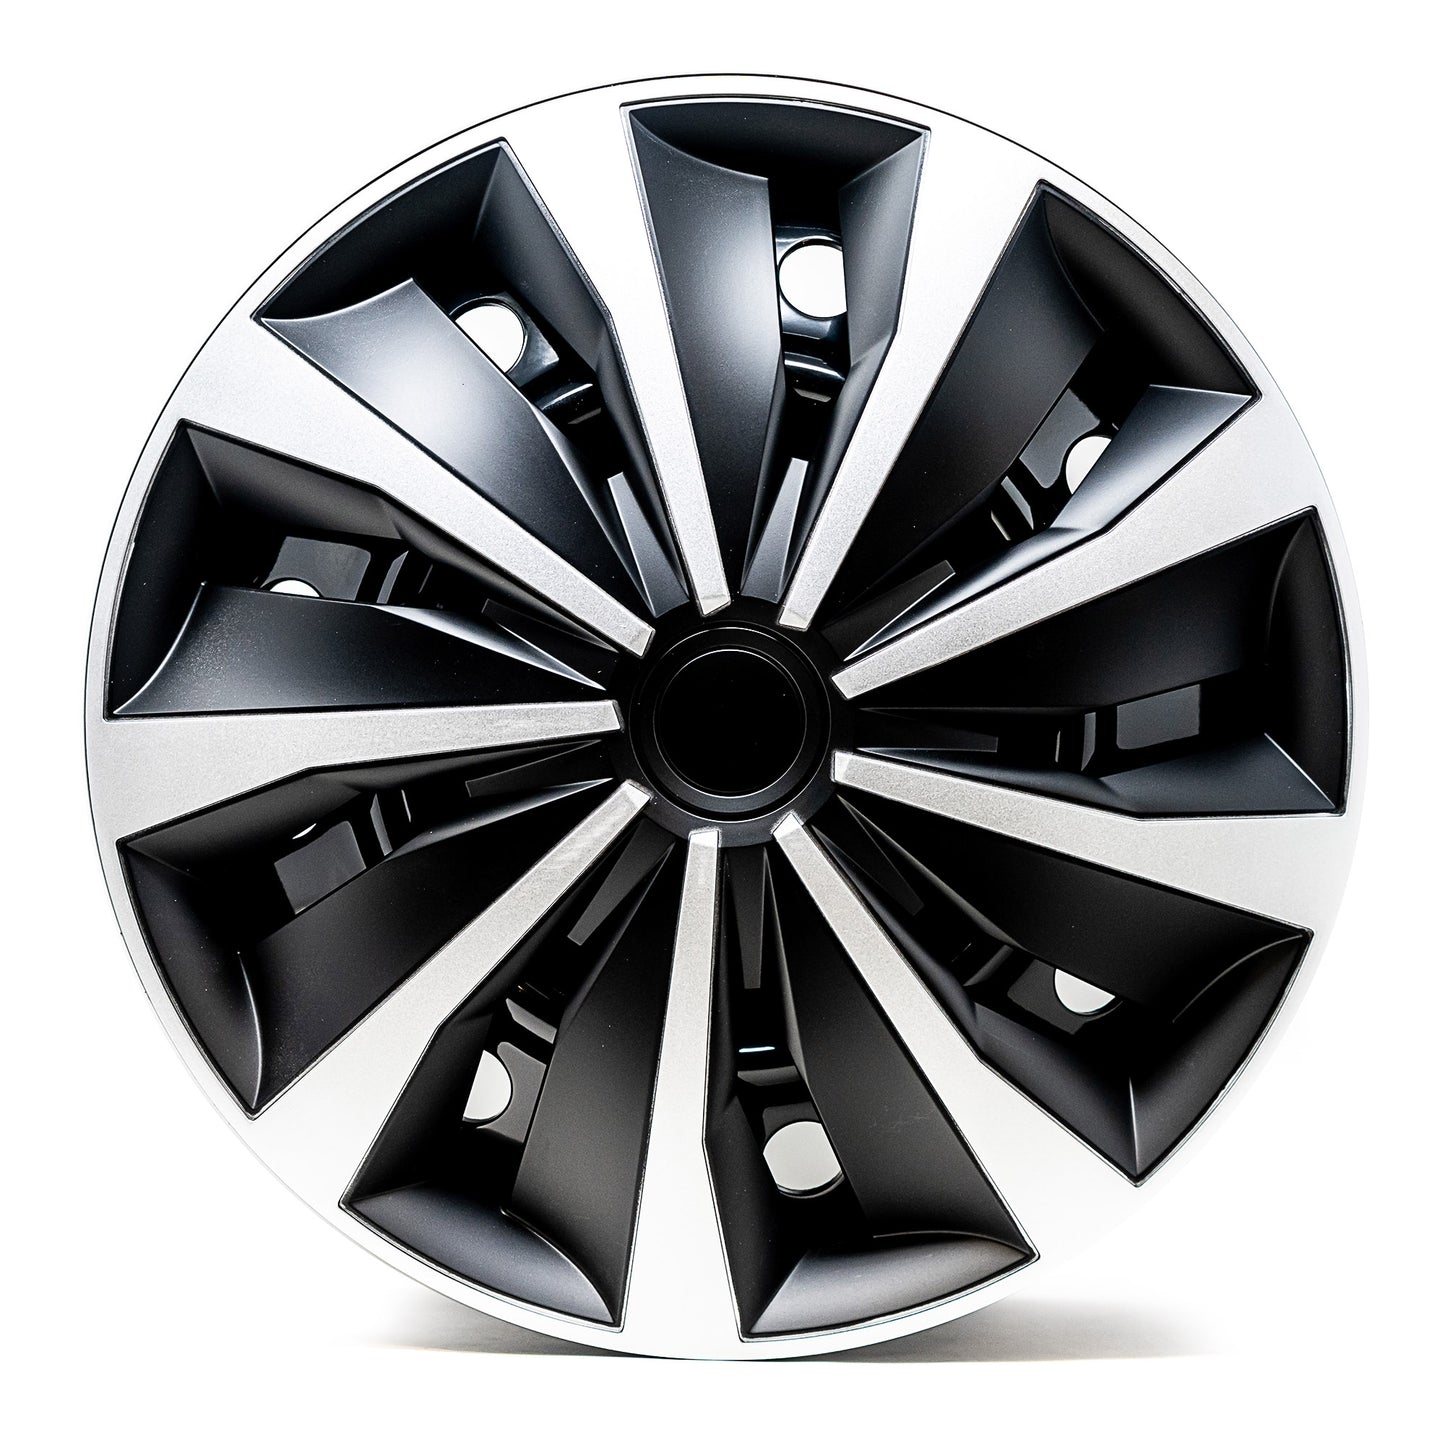 Action Wheel Cover Kit - Silver & Black (4 Pack)